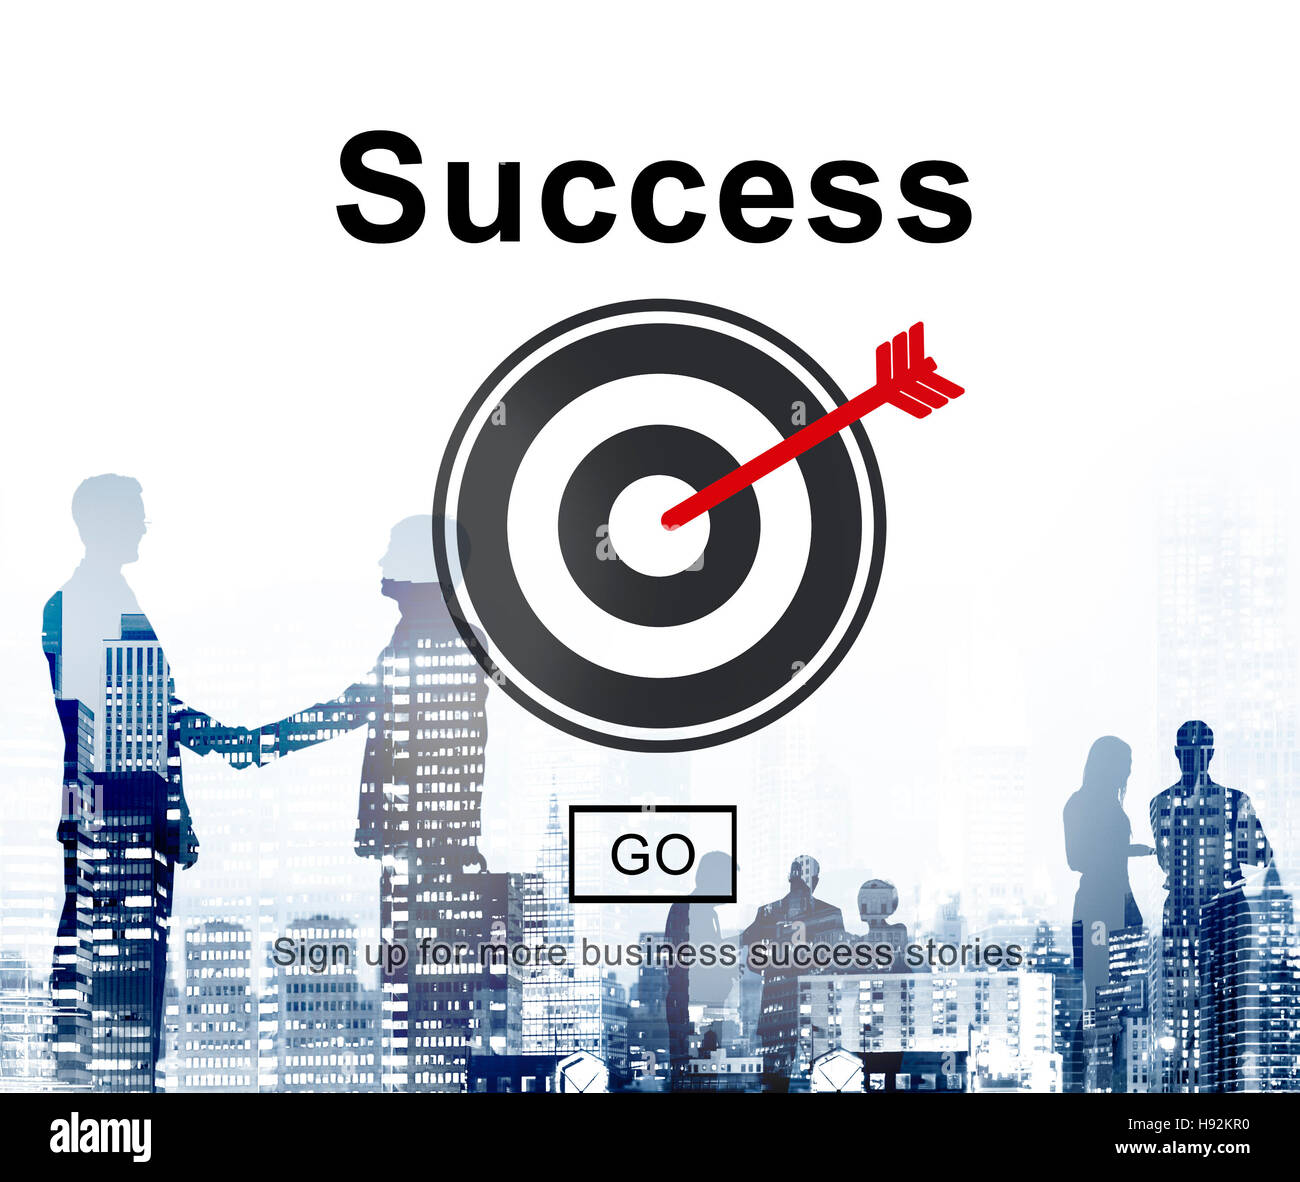 Success Mission Motivation Homepage Concept Stock Photo - Alamy